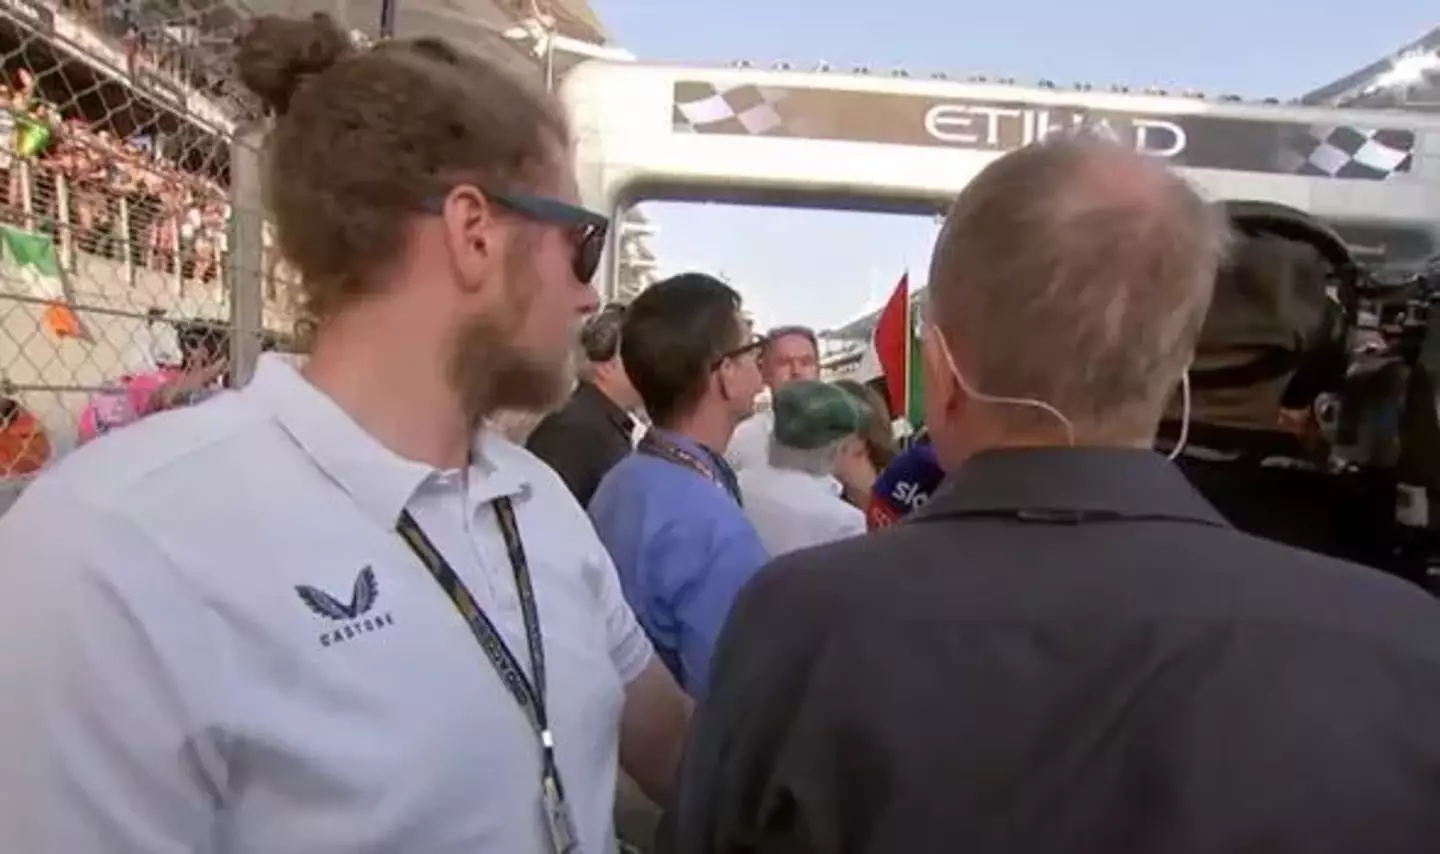 Brundle had a 'top tier' response after he was blocked off by a security guard during his grid walk.